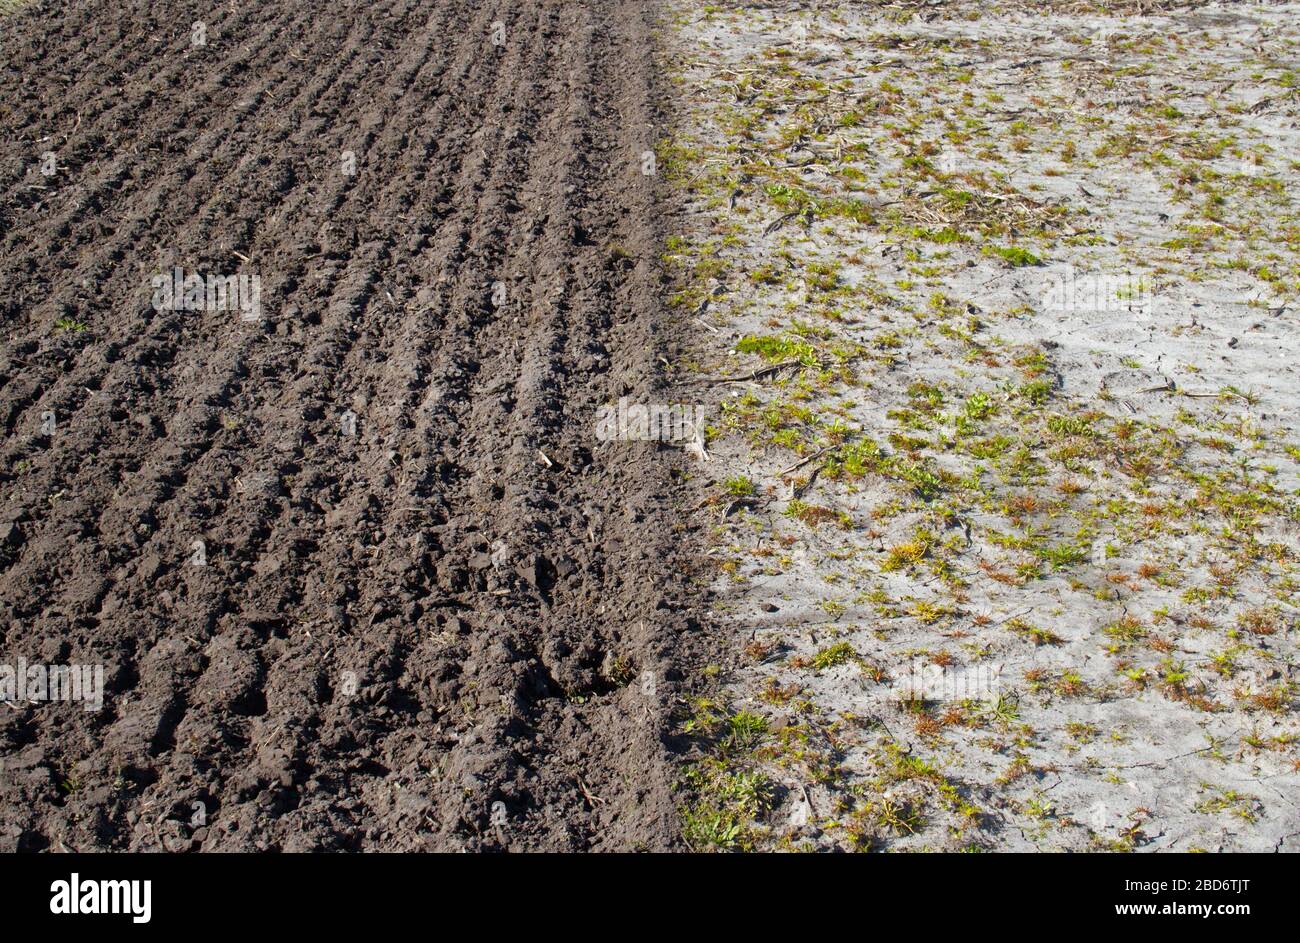 Spring tillage, a partly plowed field Stock Photo